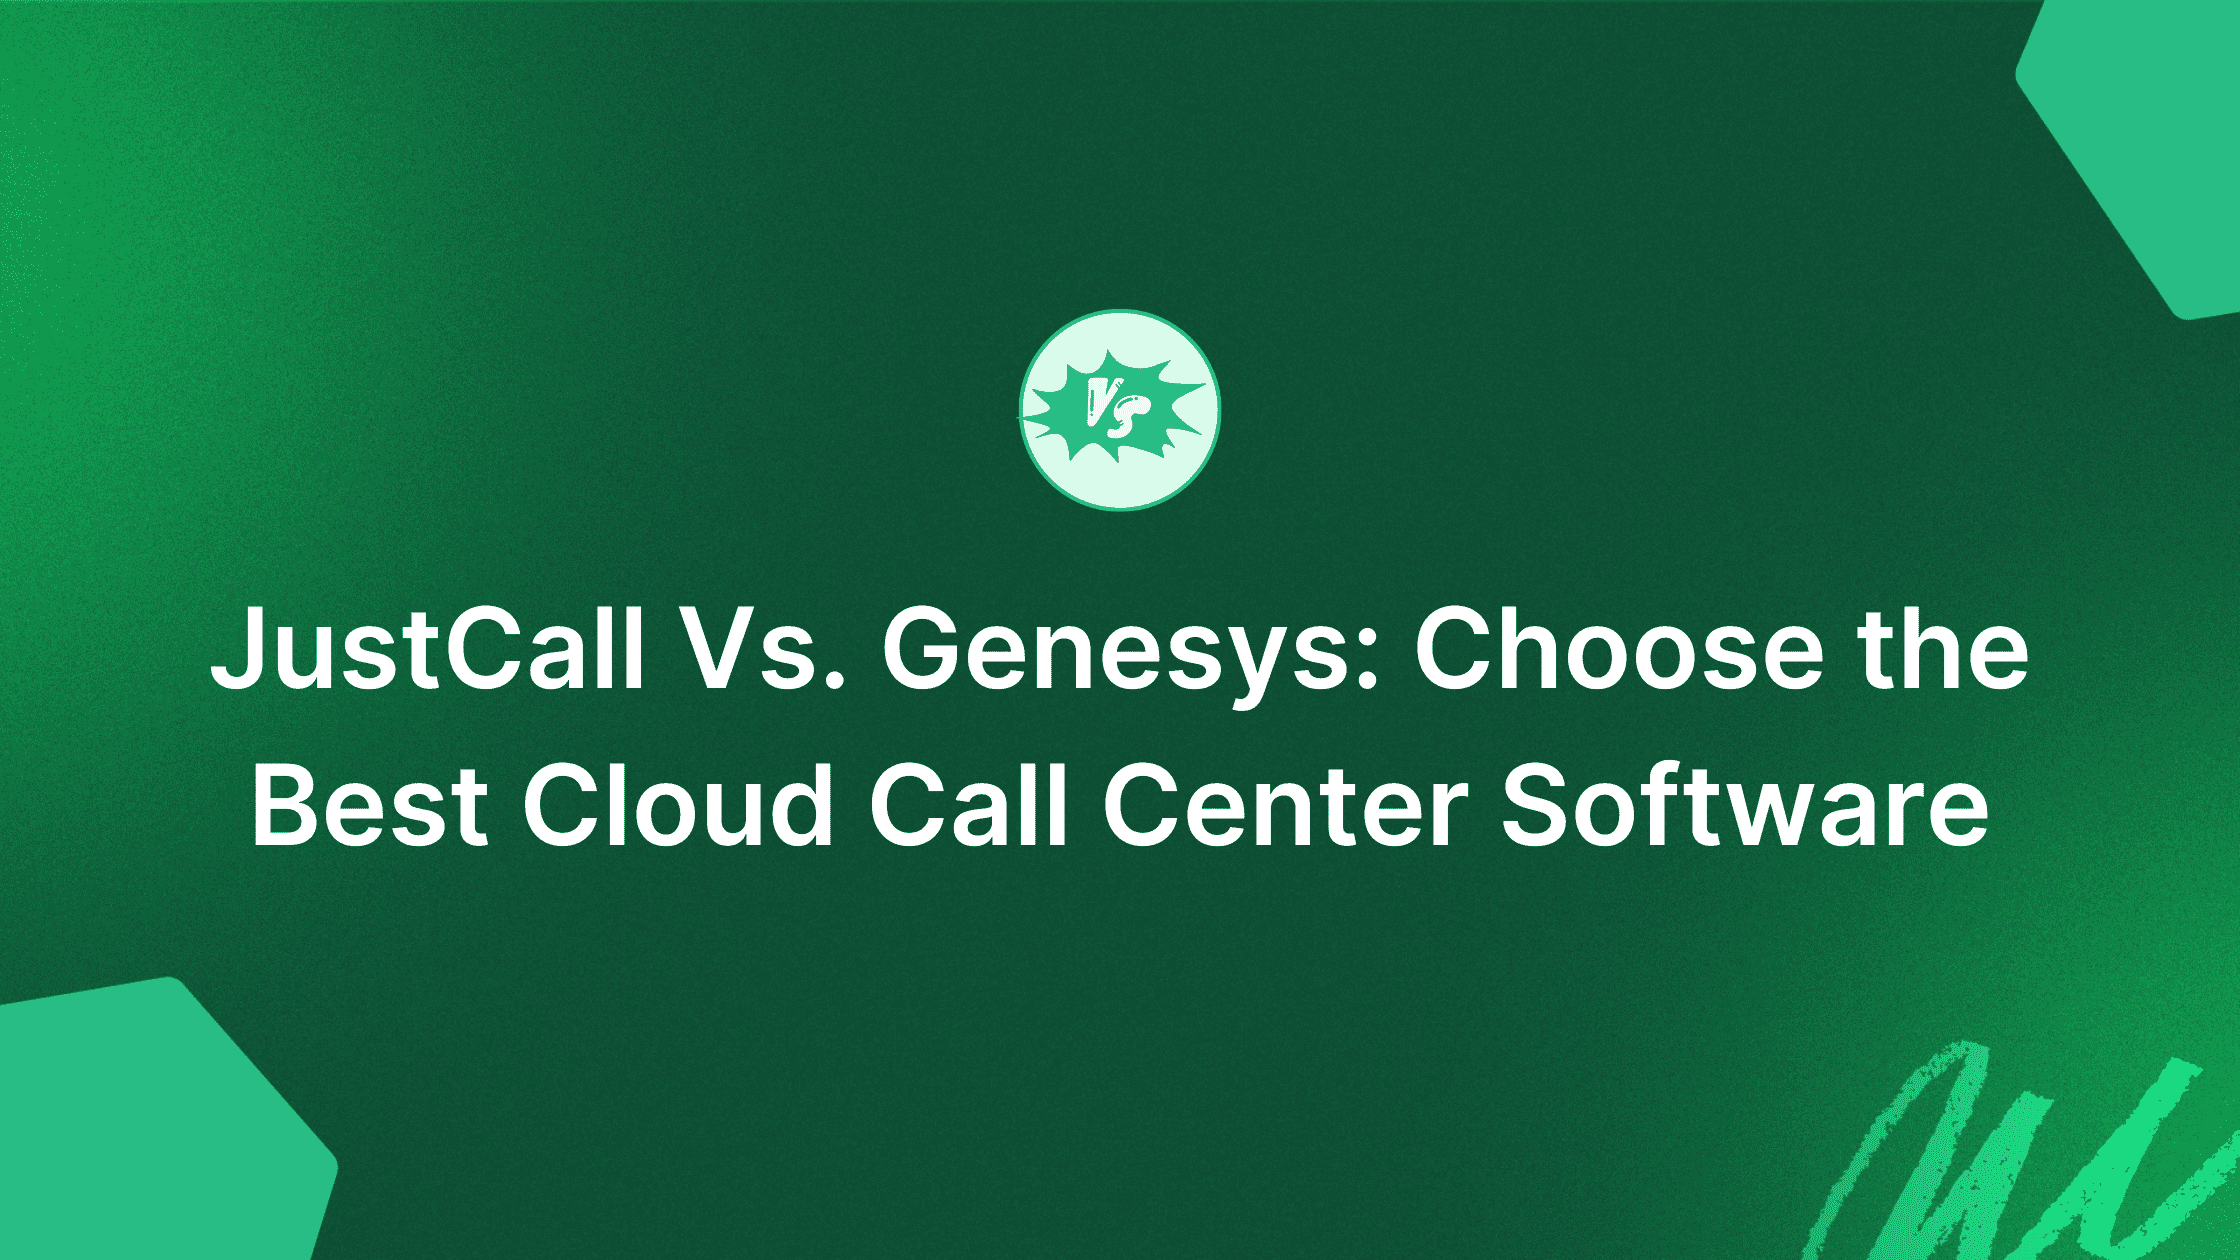 JustCall Vs. Genesys: Who Wins the Cloud Call Center Software Battle?